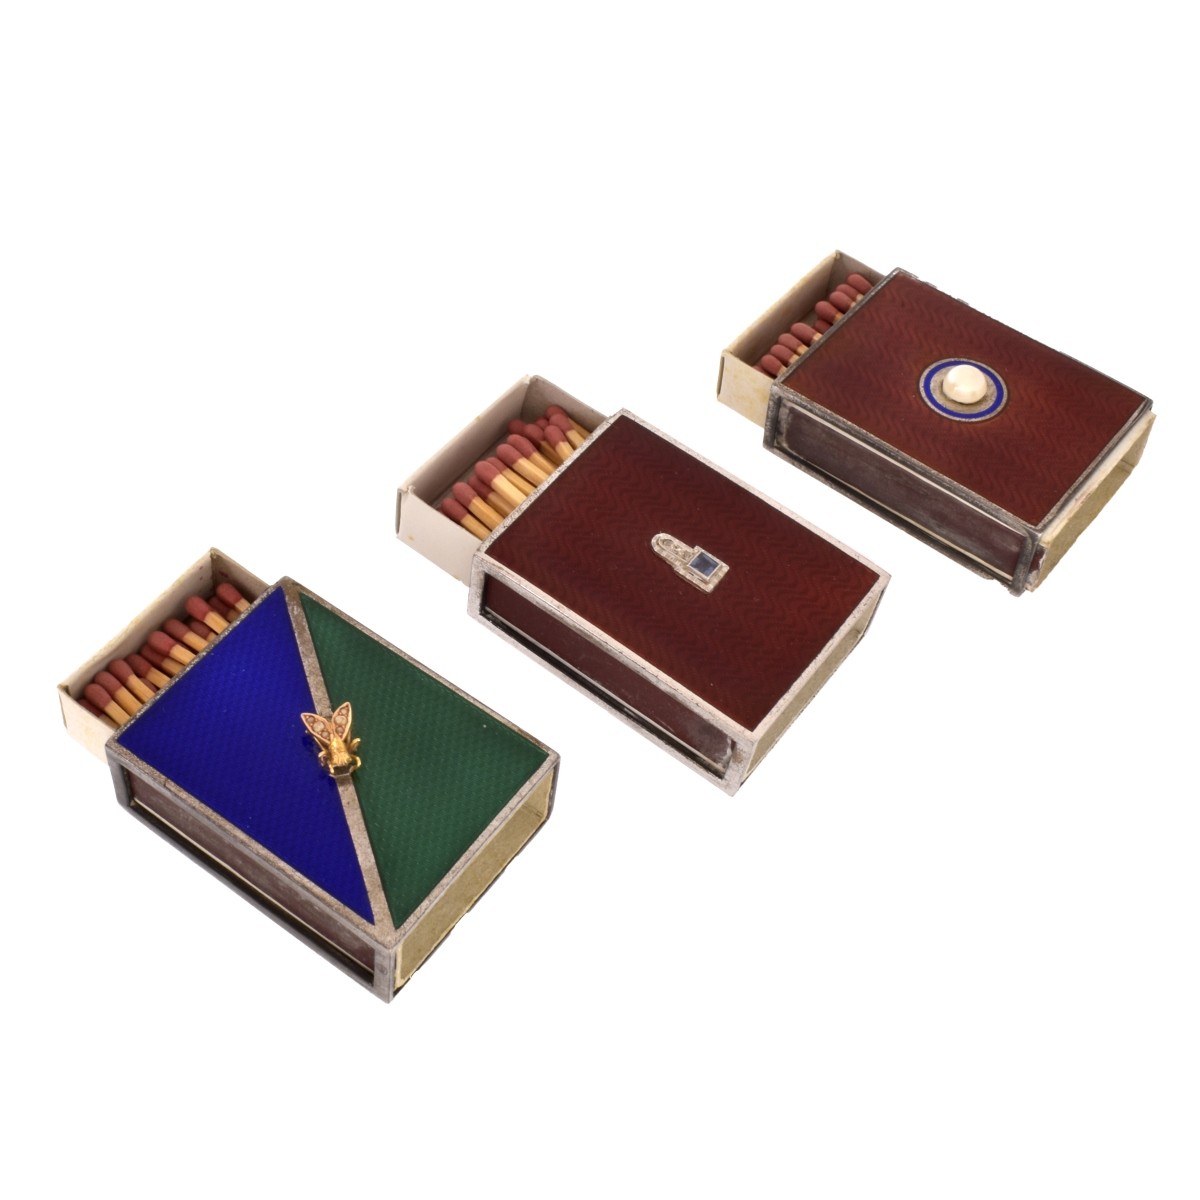 Three Silver and Enamel Match Boxes